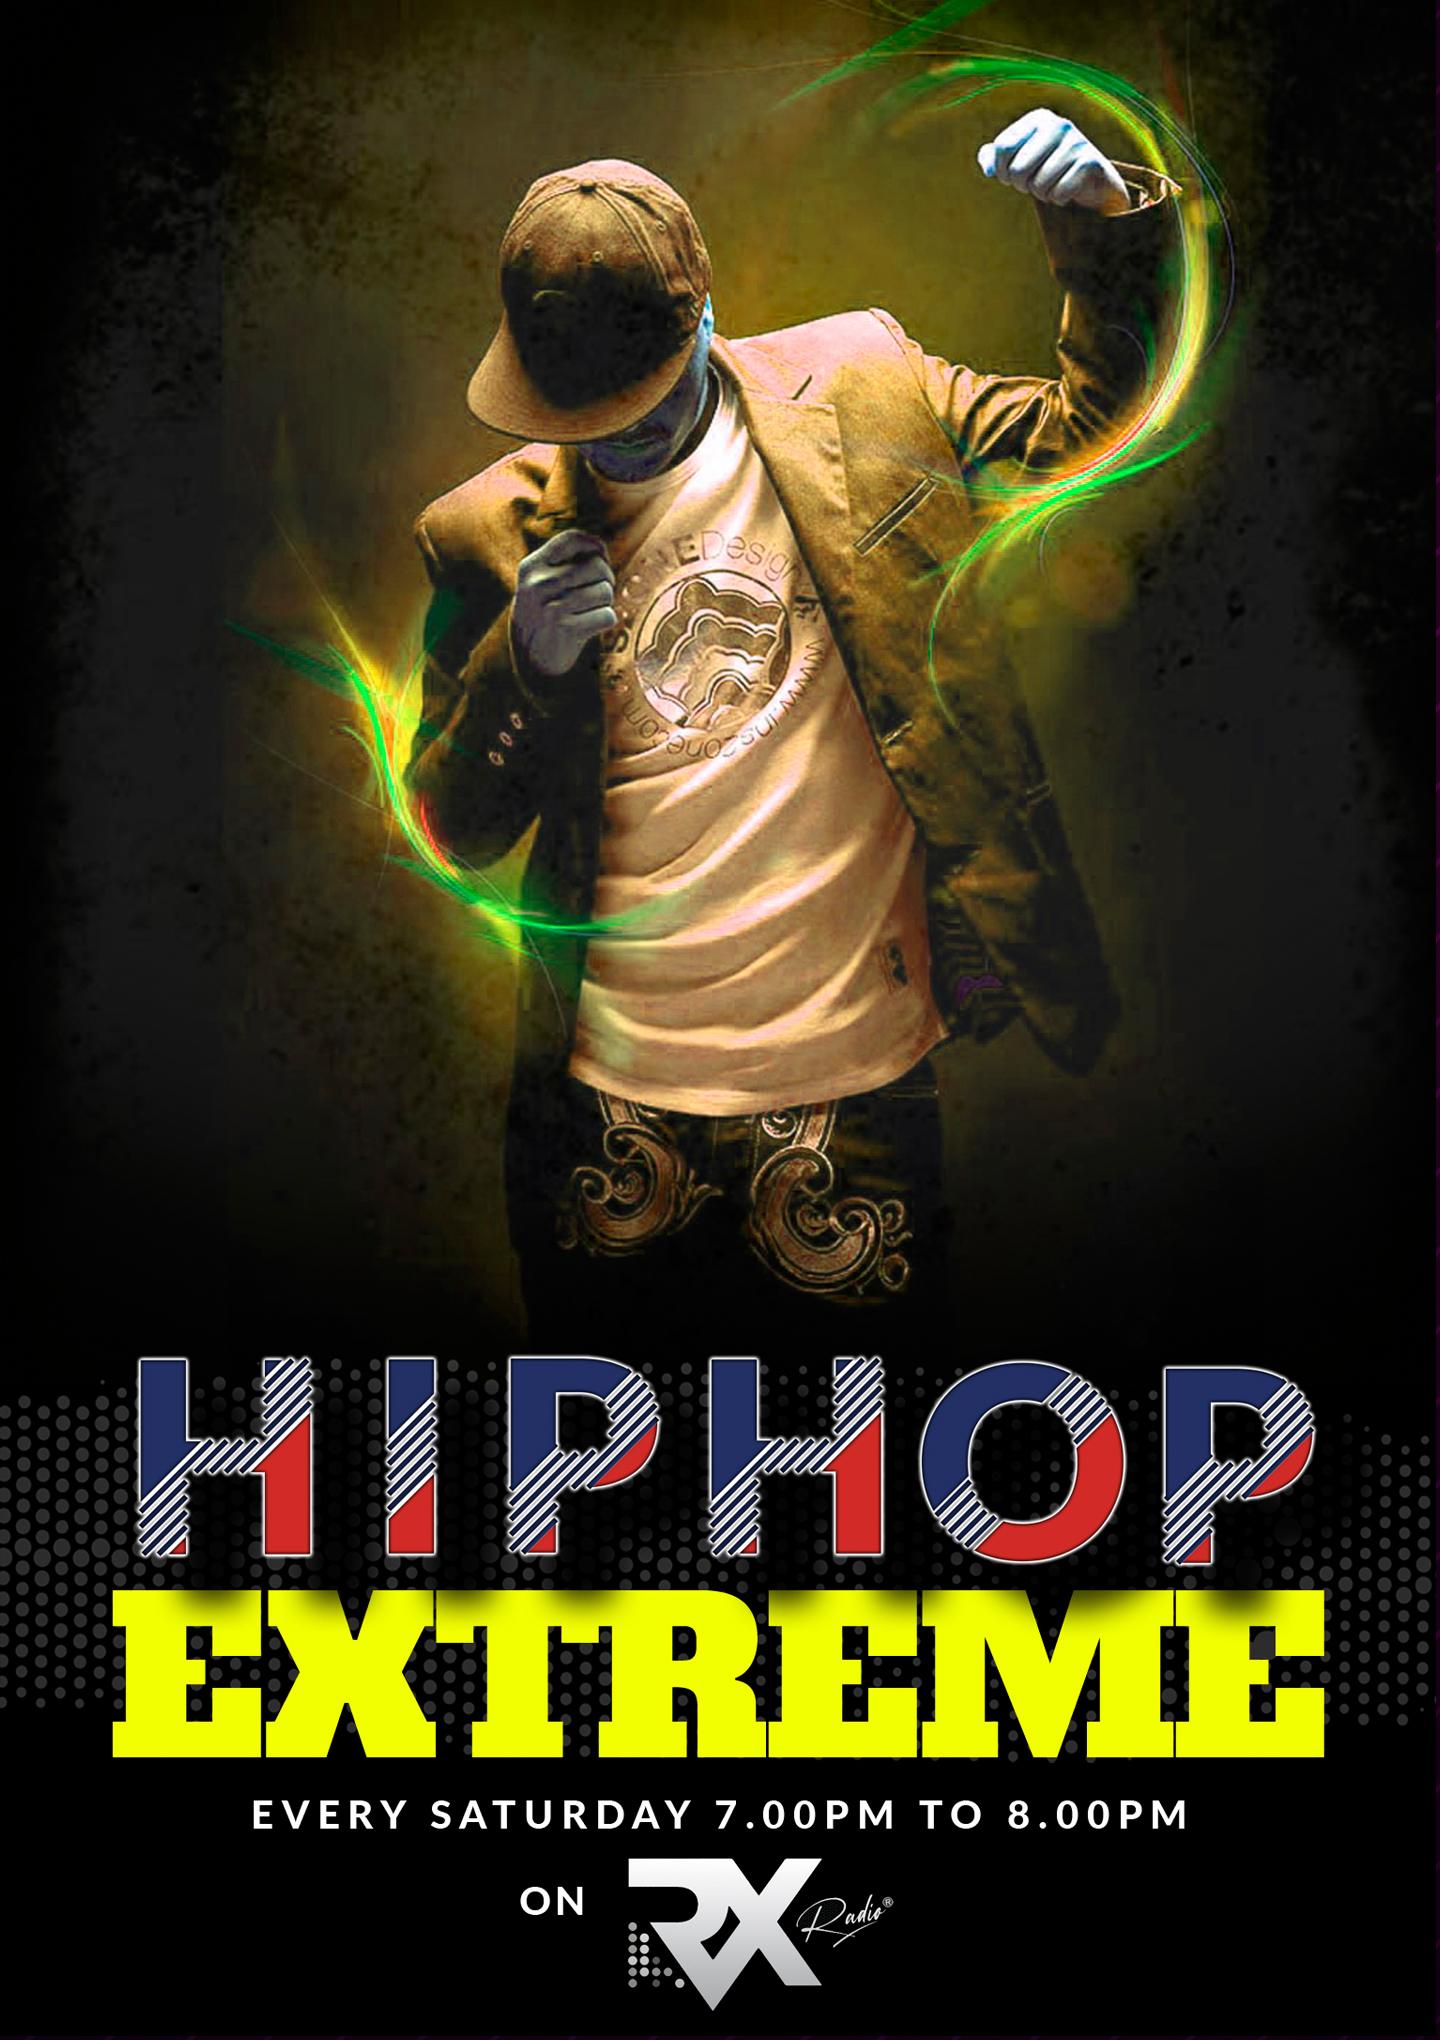 HIP HOP EXTREME with Mr Skillz: Saturday (7.00pm - 8.00pm)